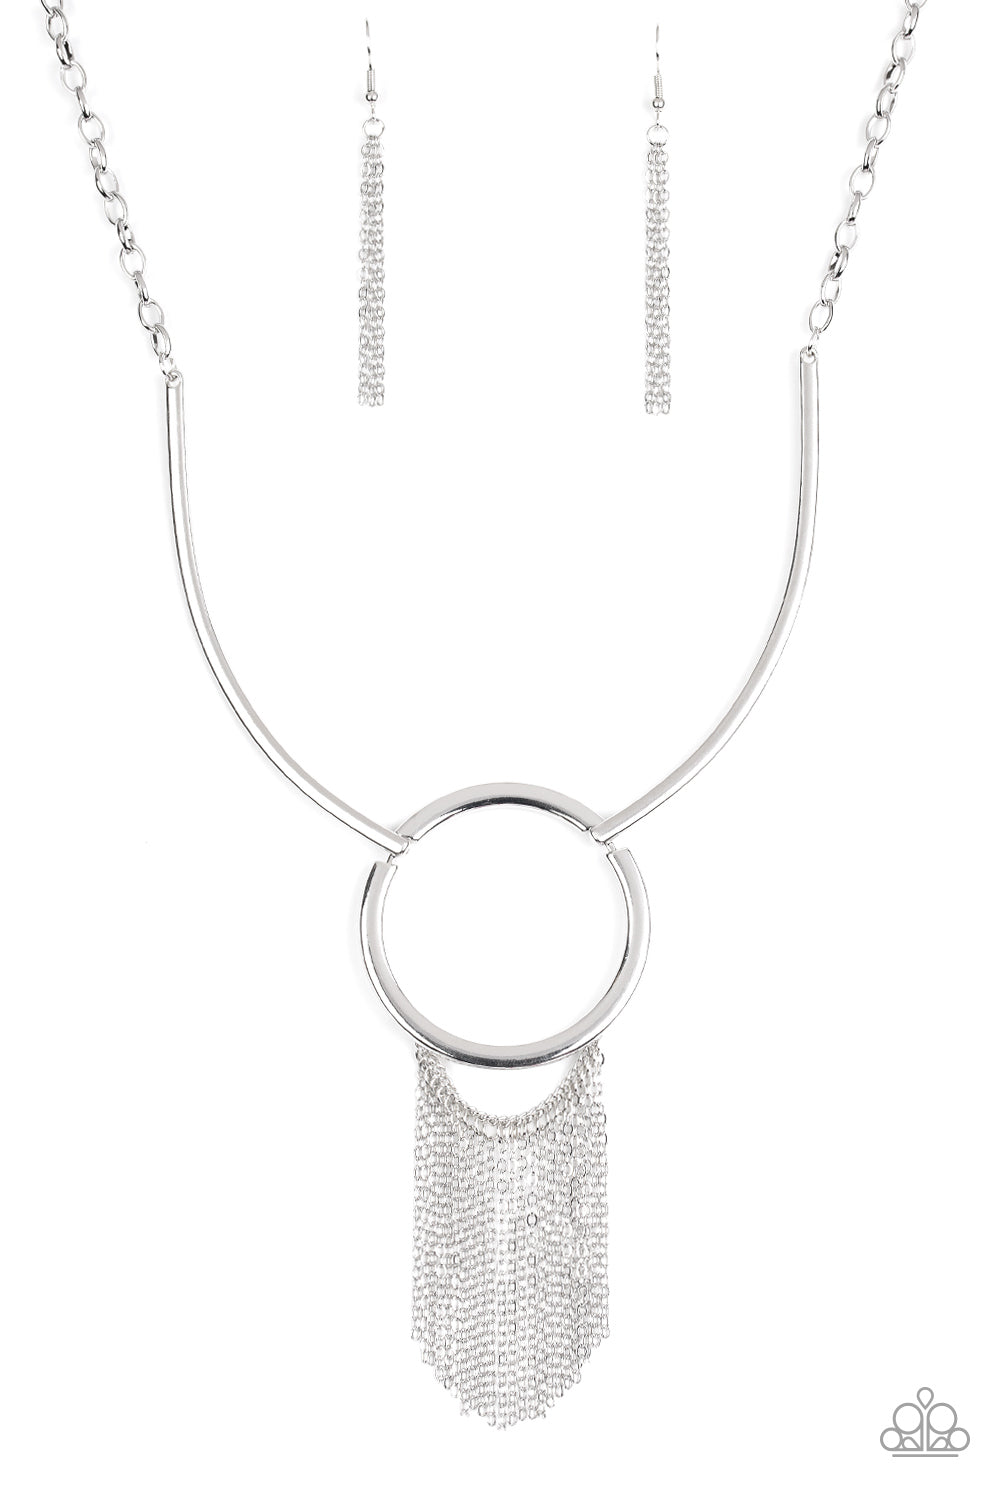 Pharaoh Paradise Silver Necklace - Paparazzi Accessories  Attached to two bowing silver bars, a shiny silver hoop gives way to a shimmery silver chain fringe, creating a statement making look below the collar. Features an adjustable clasp closure.  Sold as one individual necklace. Includes one pair of matching earrings.